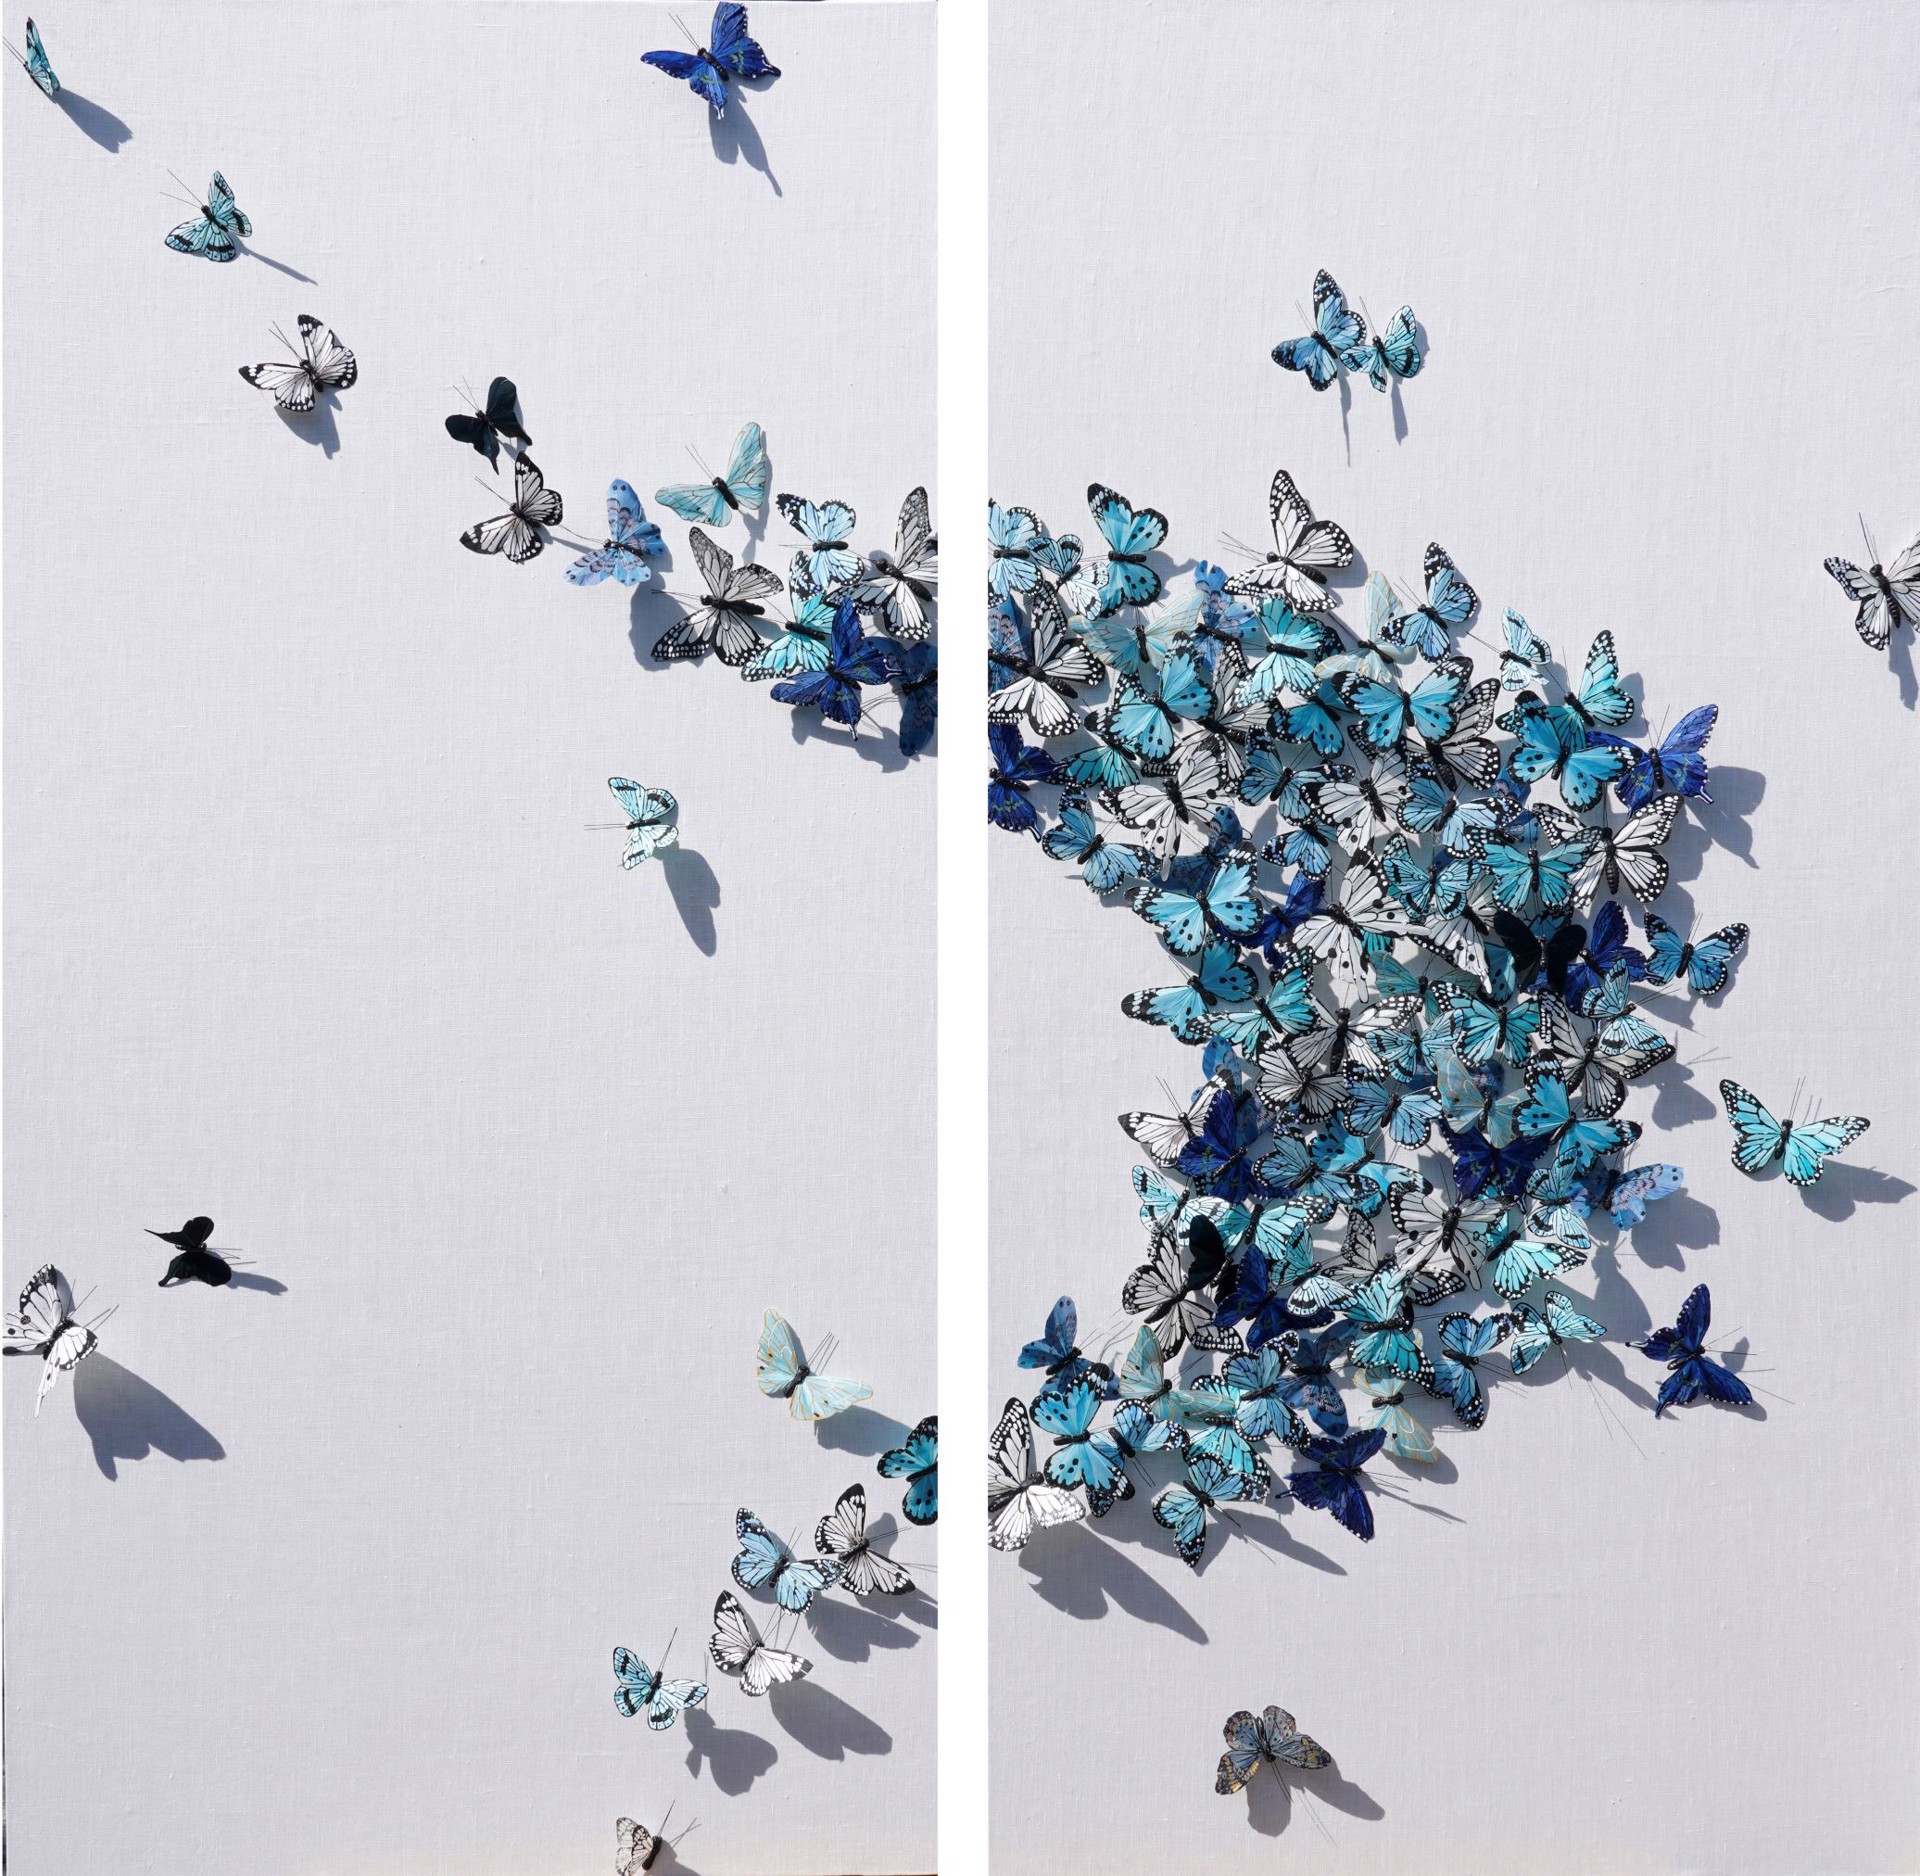 Blue Migration (triptych)  Commission for Sherrill Canet by Juan Carlos Collada